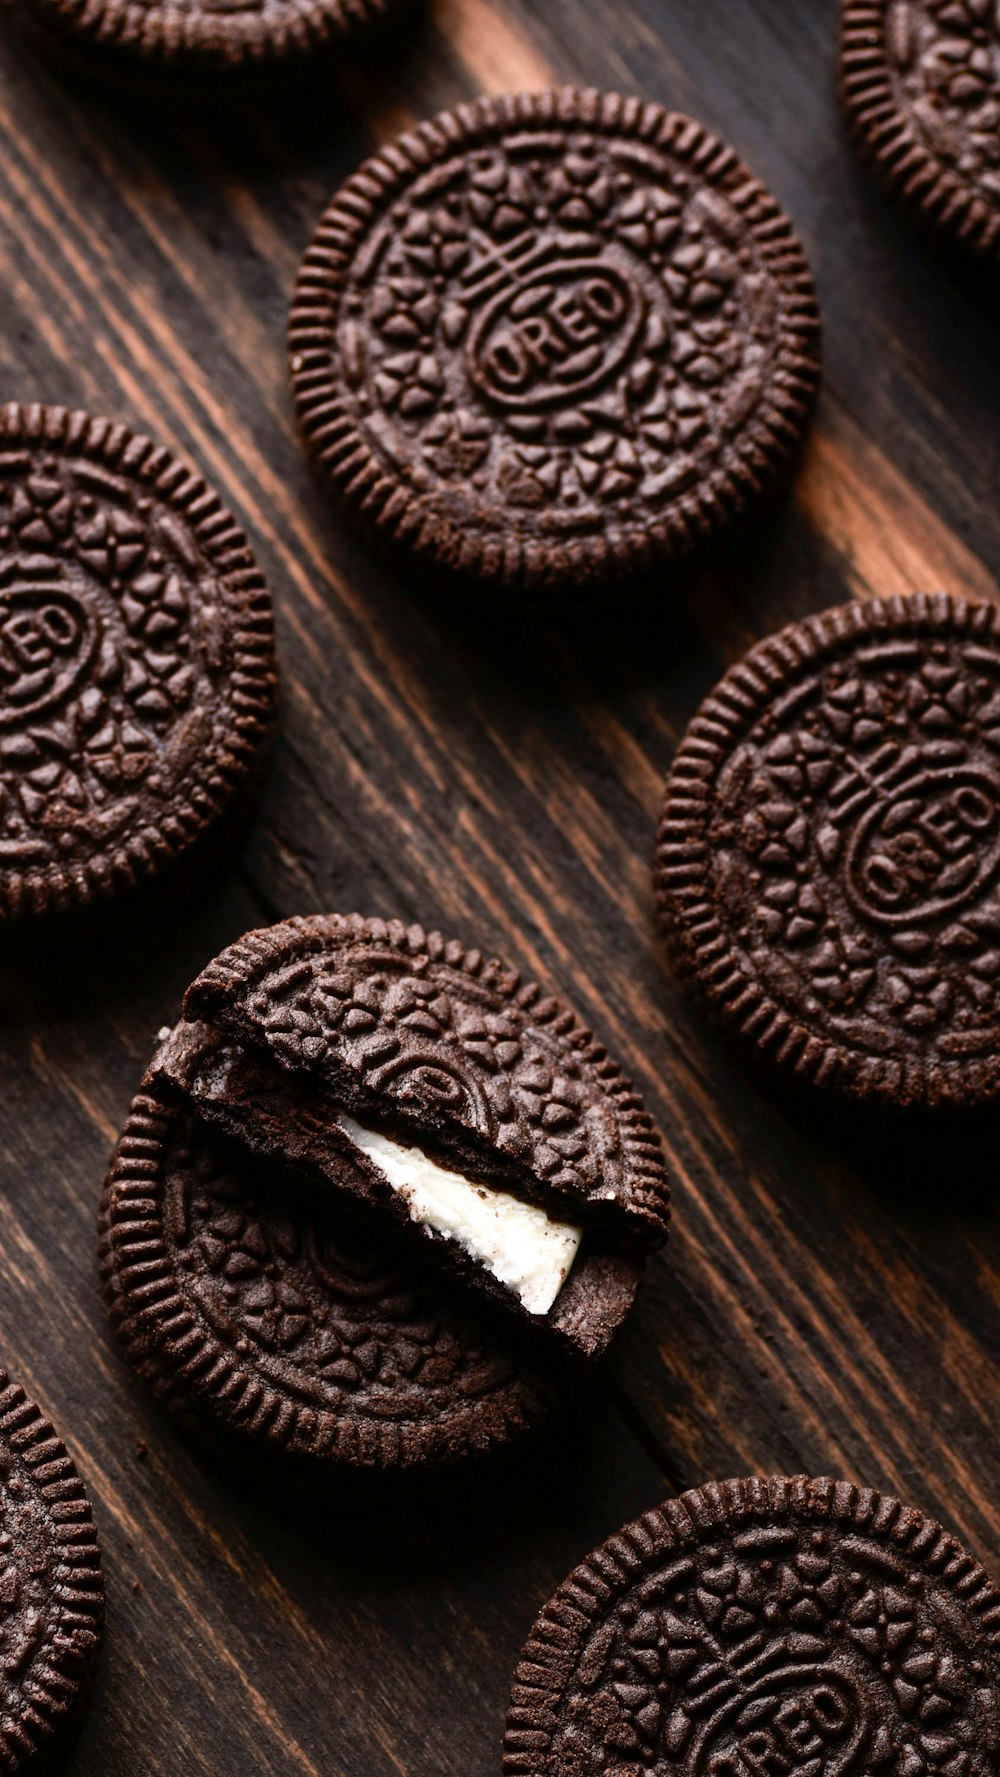 oreo cookies with a bite taken out of one